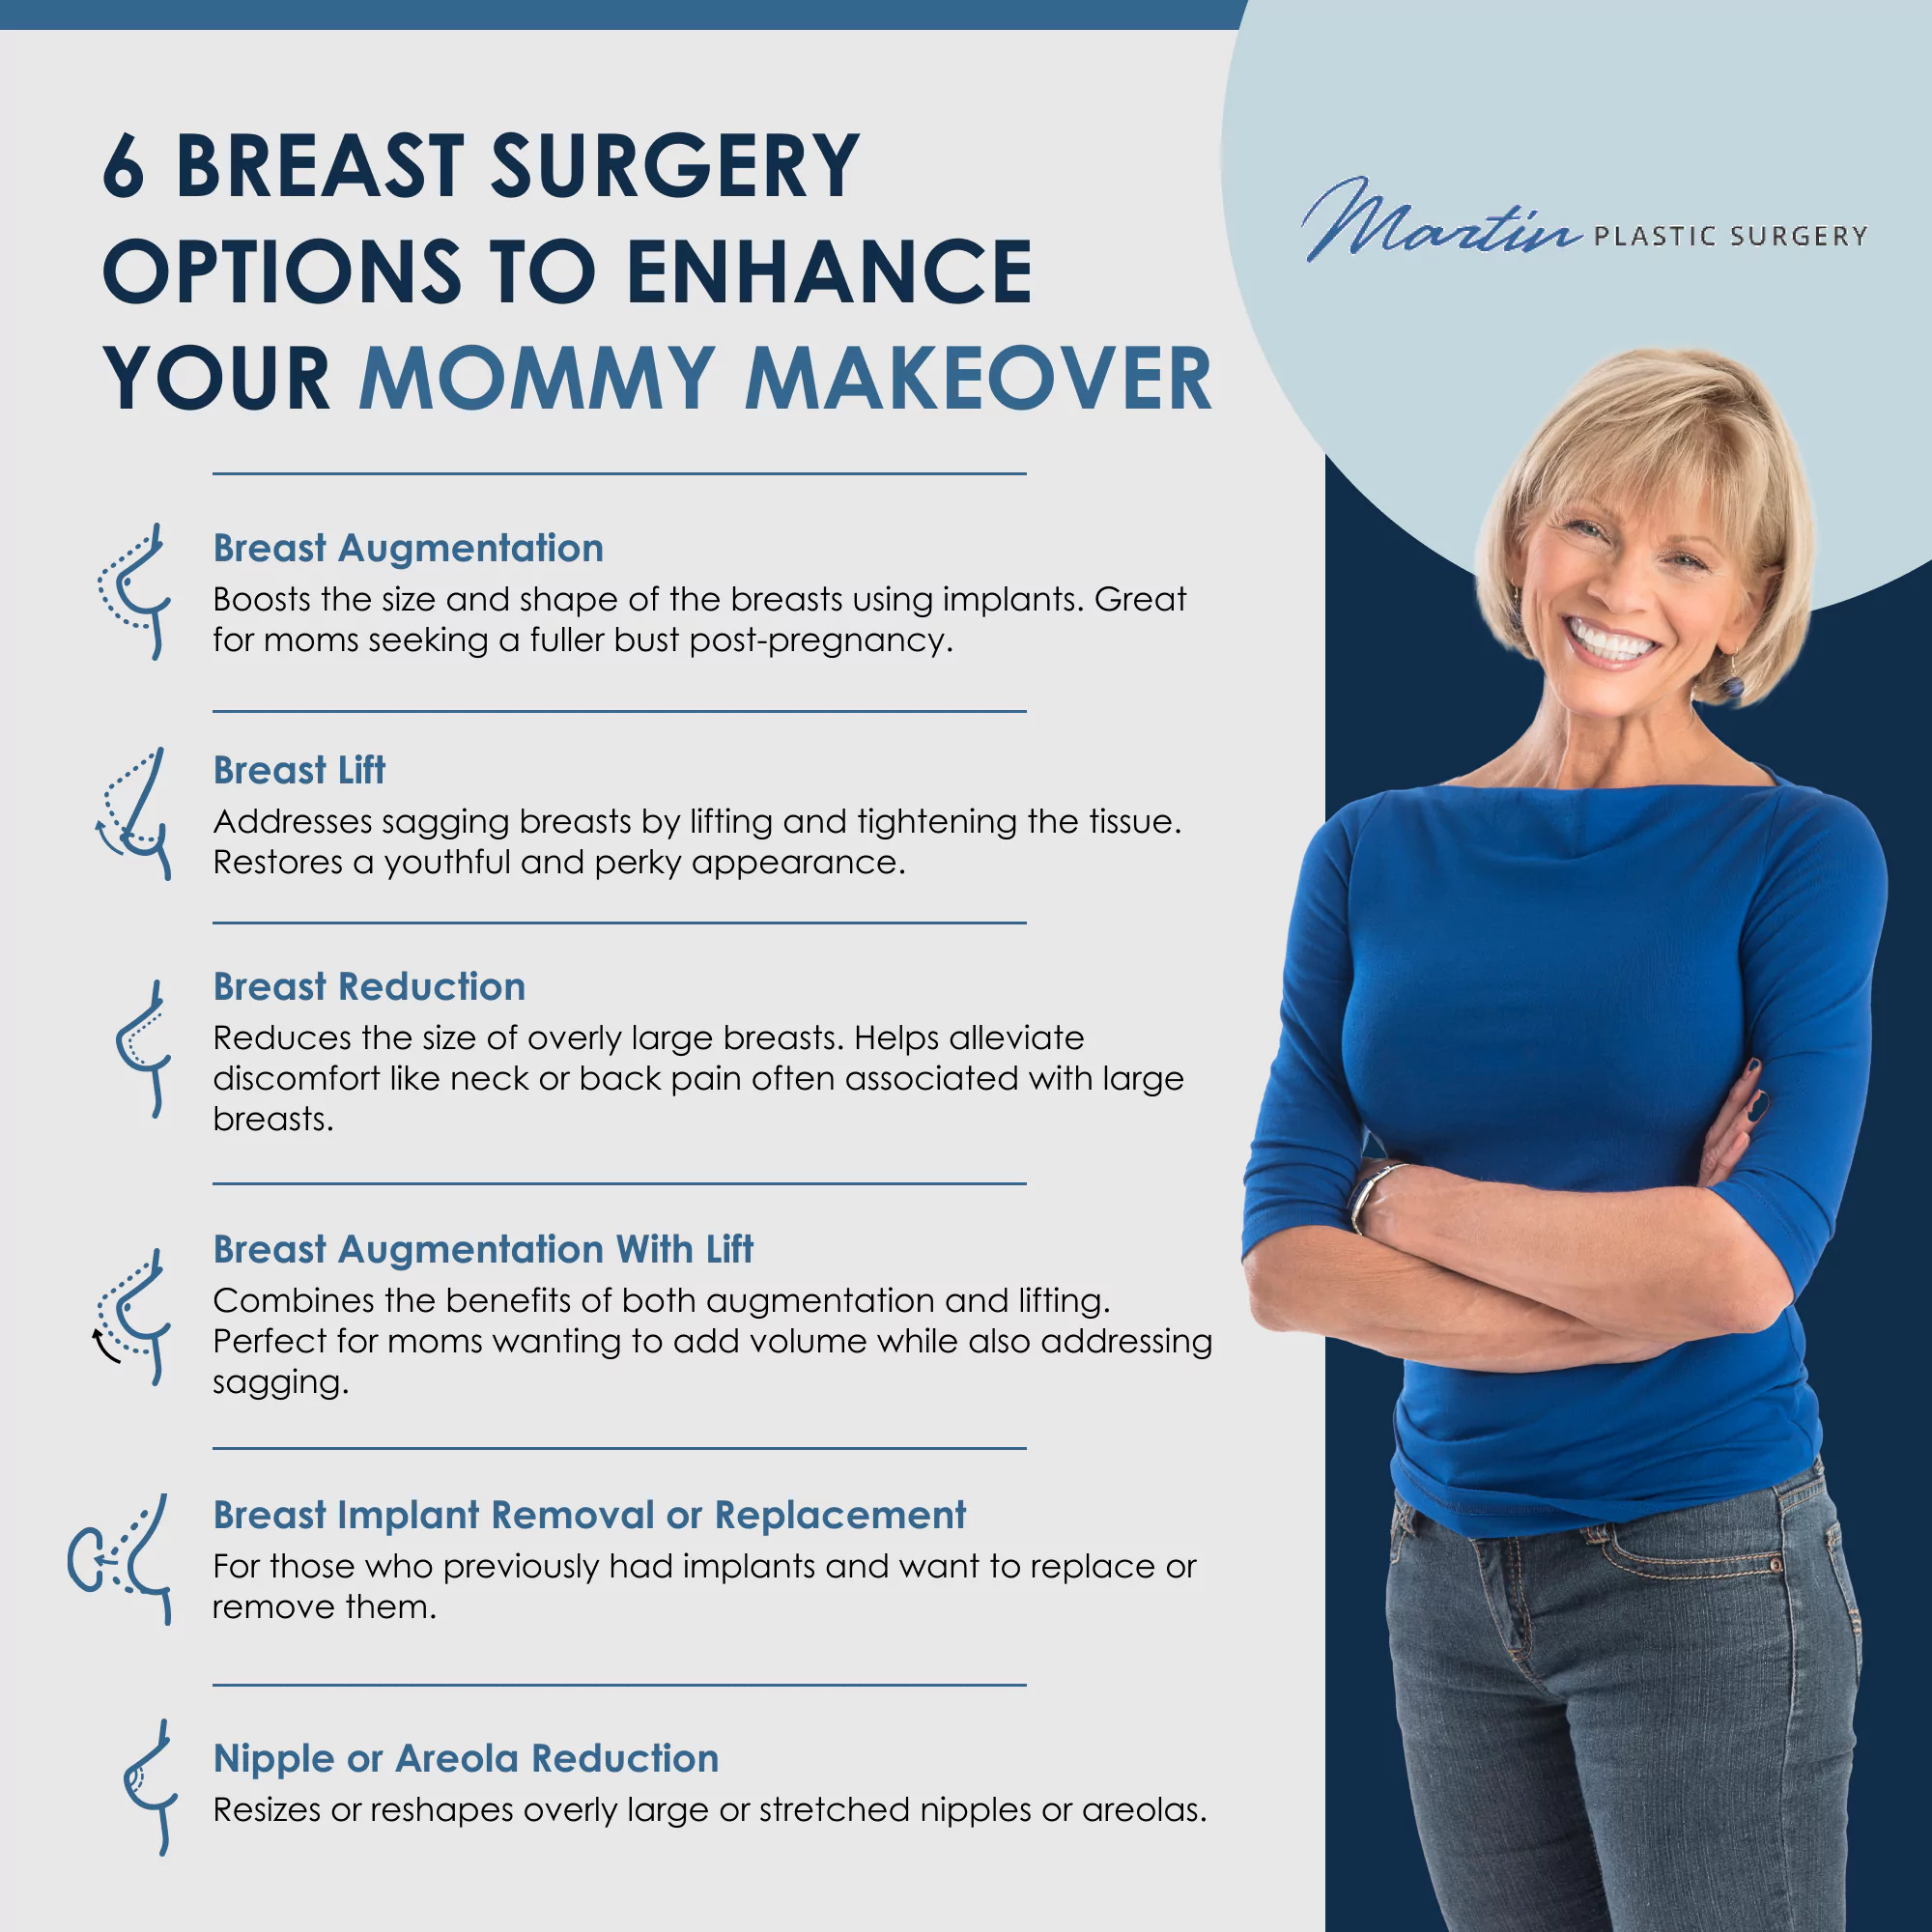 6 BREAST SURGERY OPTIONS TO ENHANCE YOUR MOMMY MAKEOVER